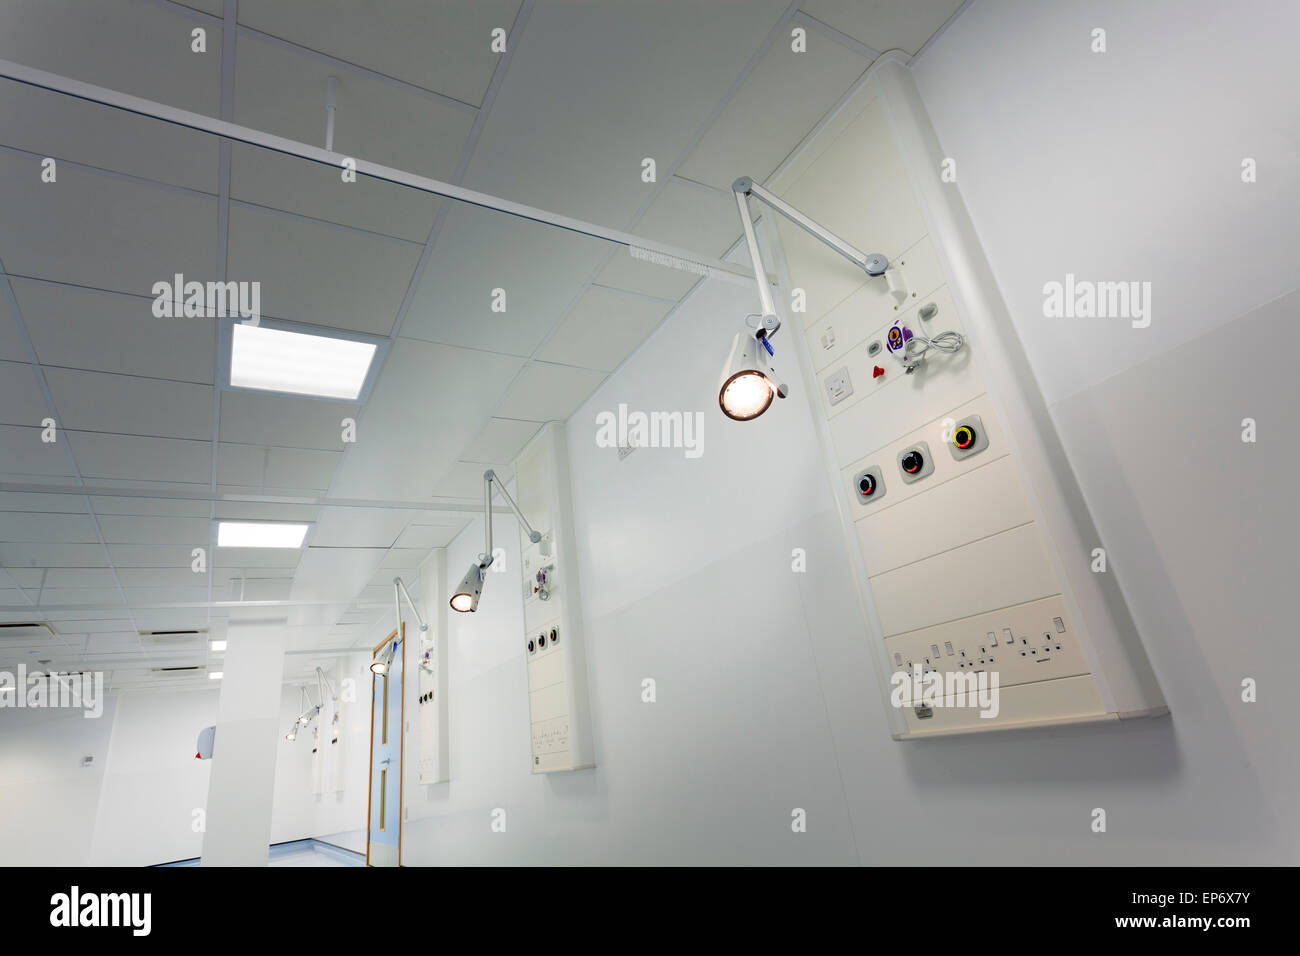 bedhead service systems in hospital ward Stock Photo